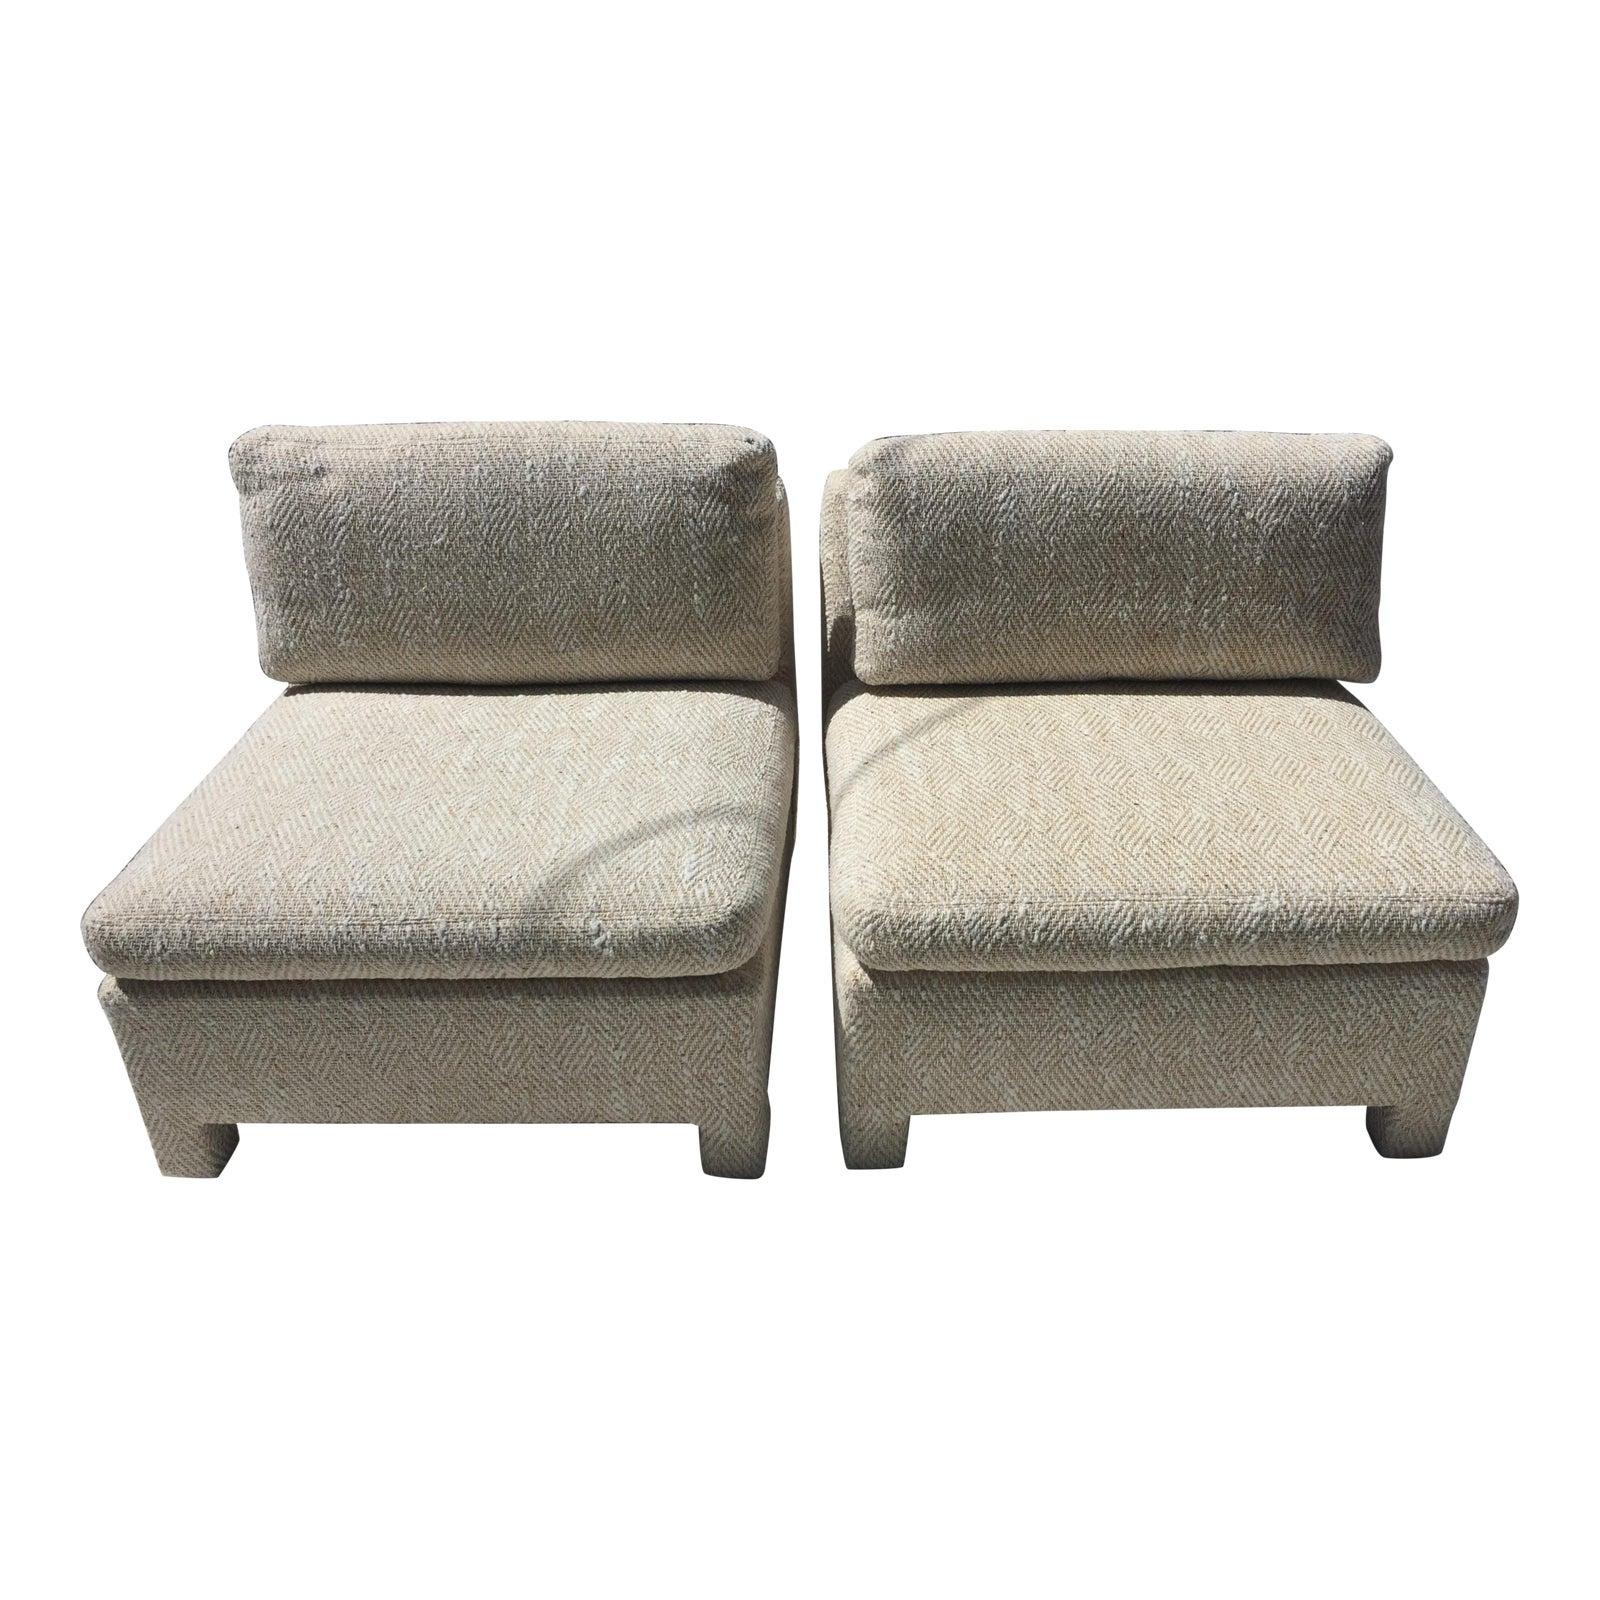 Slipper chairs by Milo Baughman for Thayer Coggin 1979 - a pair

These comfortable extremely well made slipper chairs are a set of 4 - we are offering them as 2 pairs of 2 chairs (4 in all) -- the detail pictures show the pair at the showroom